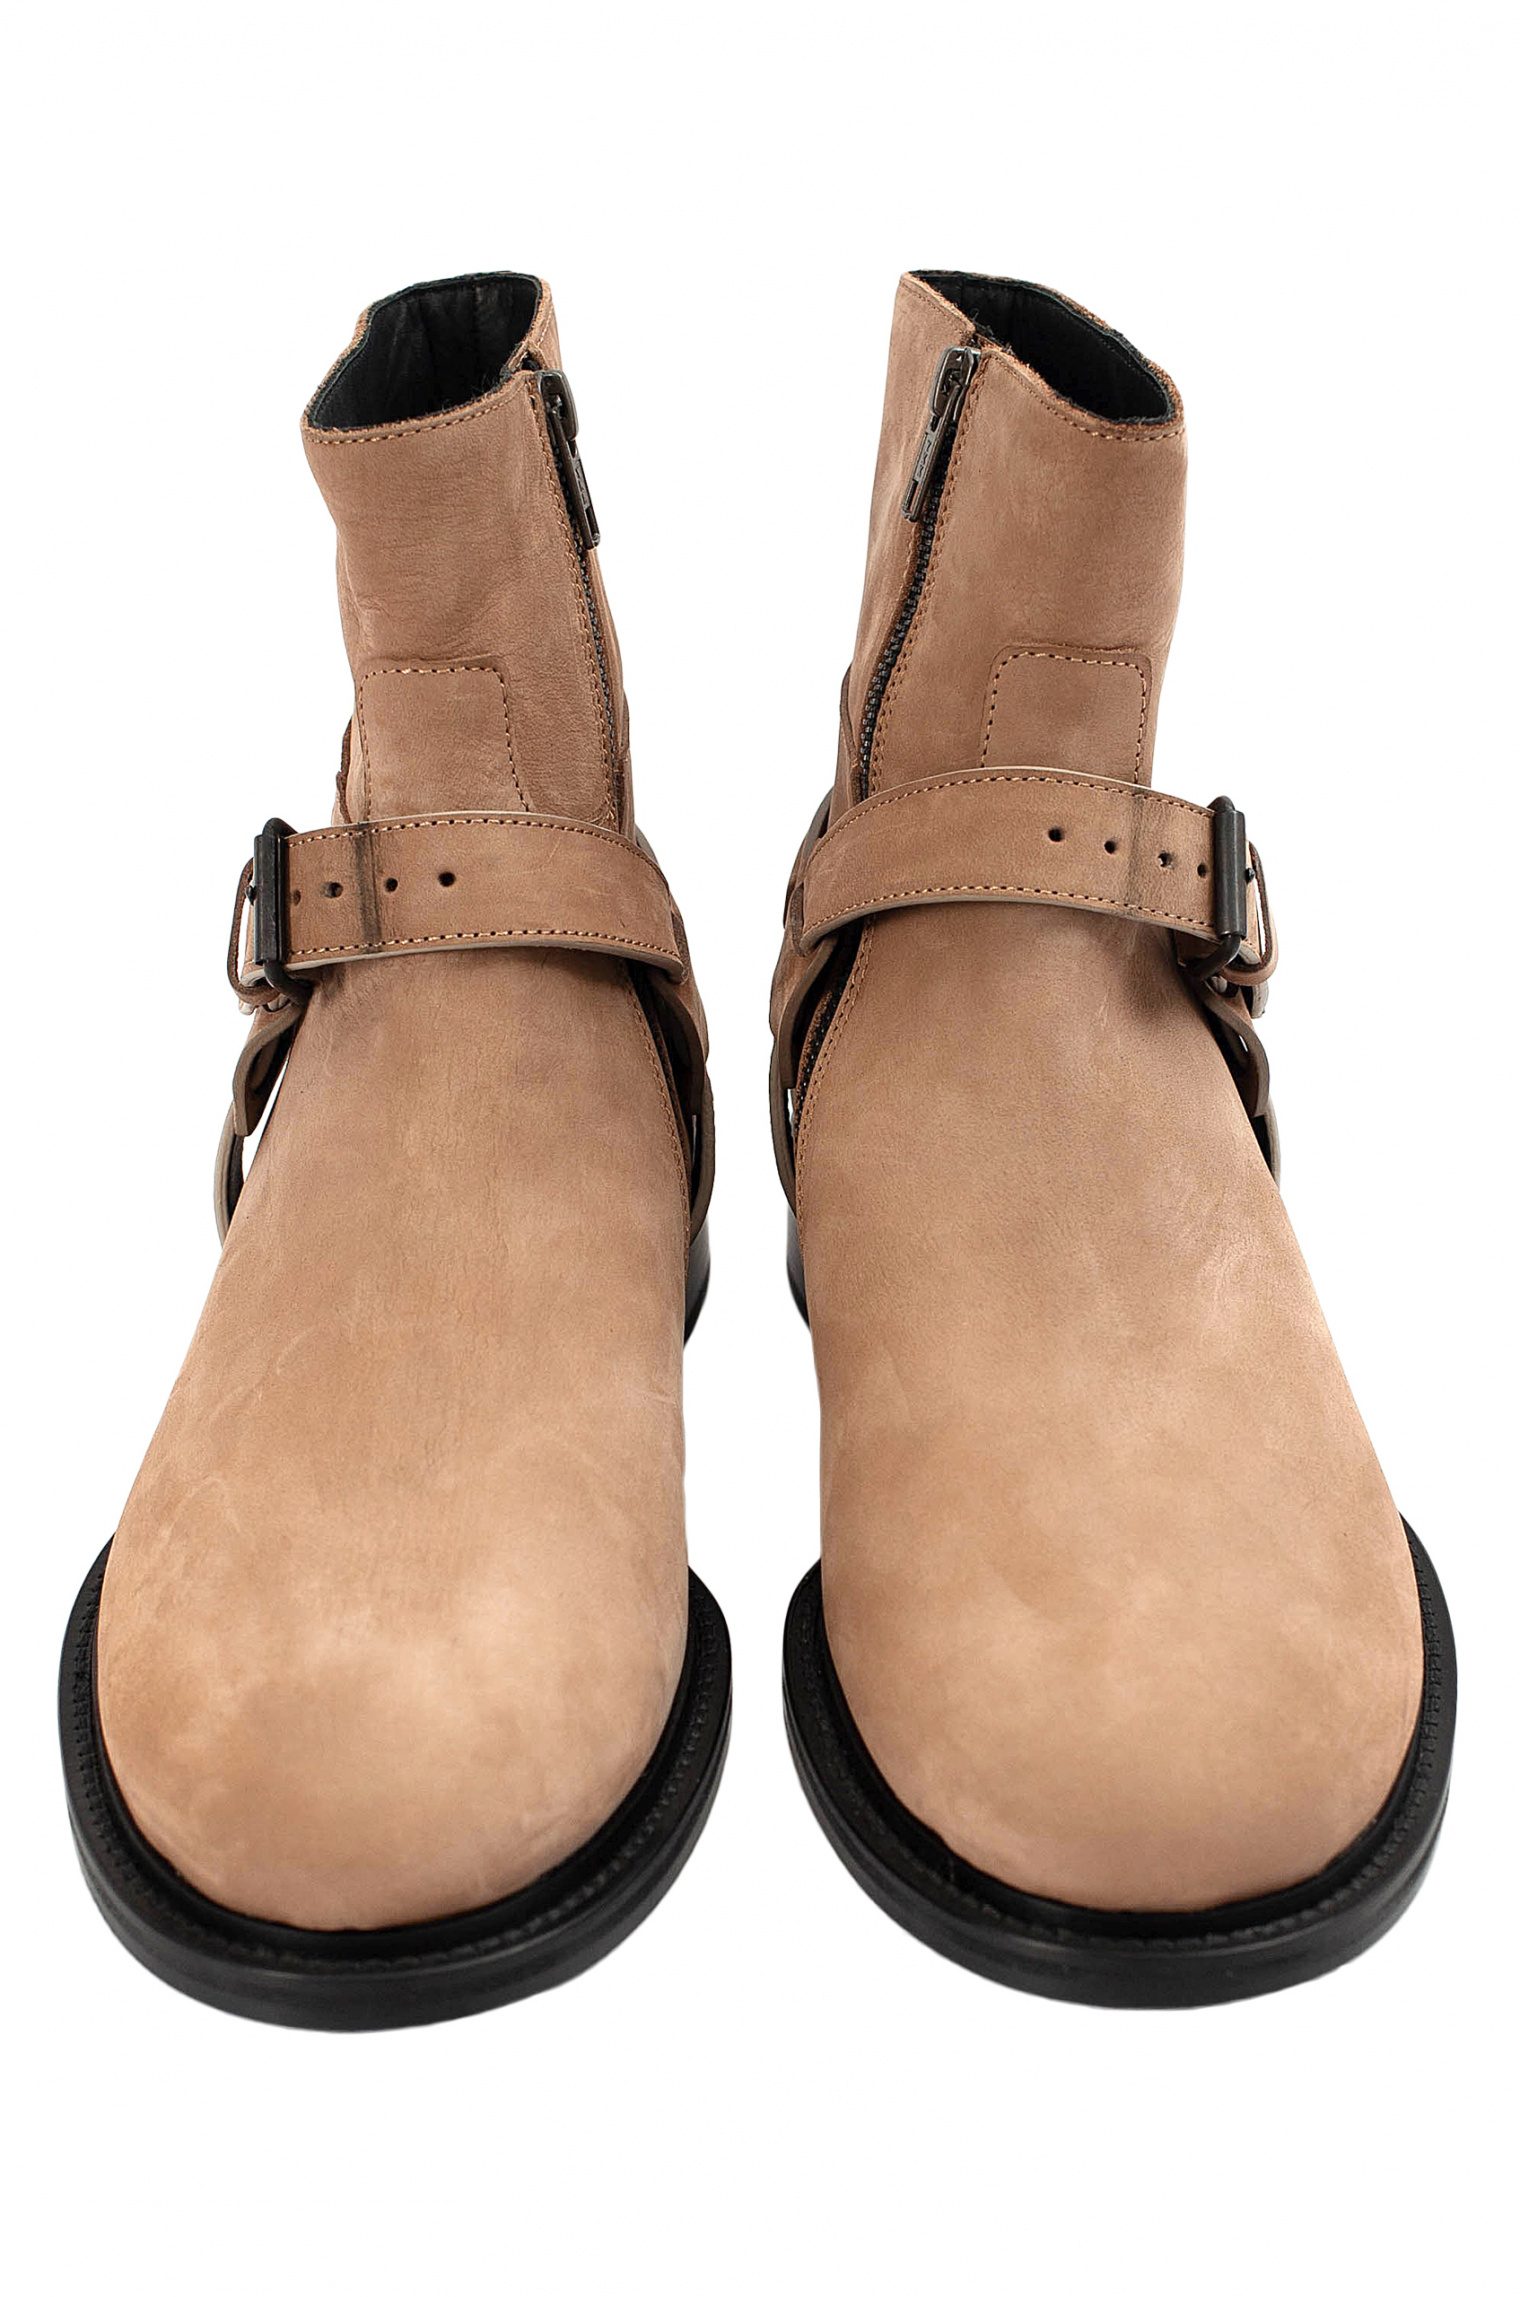 Ann Demeulemeester Suede Ankle Boots